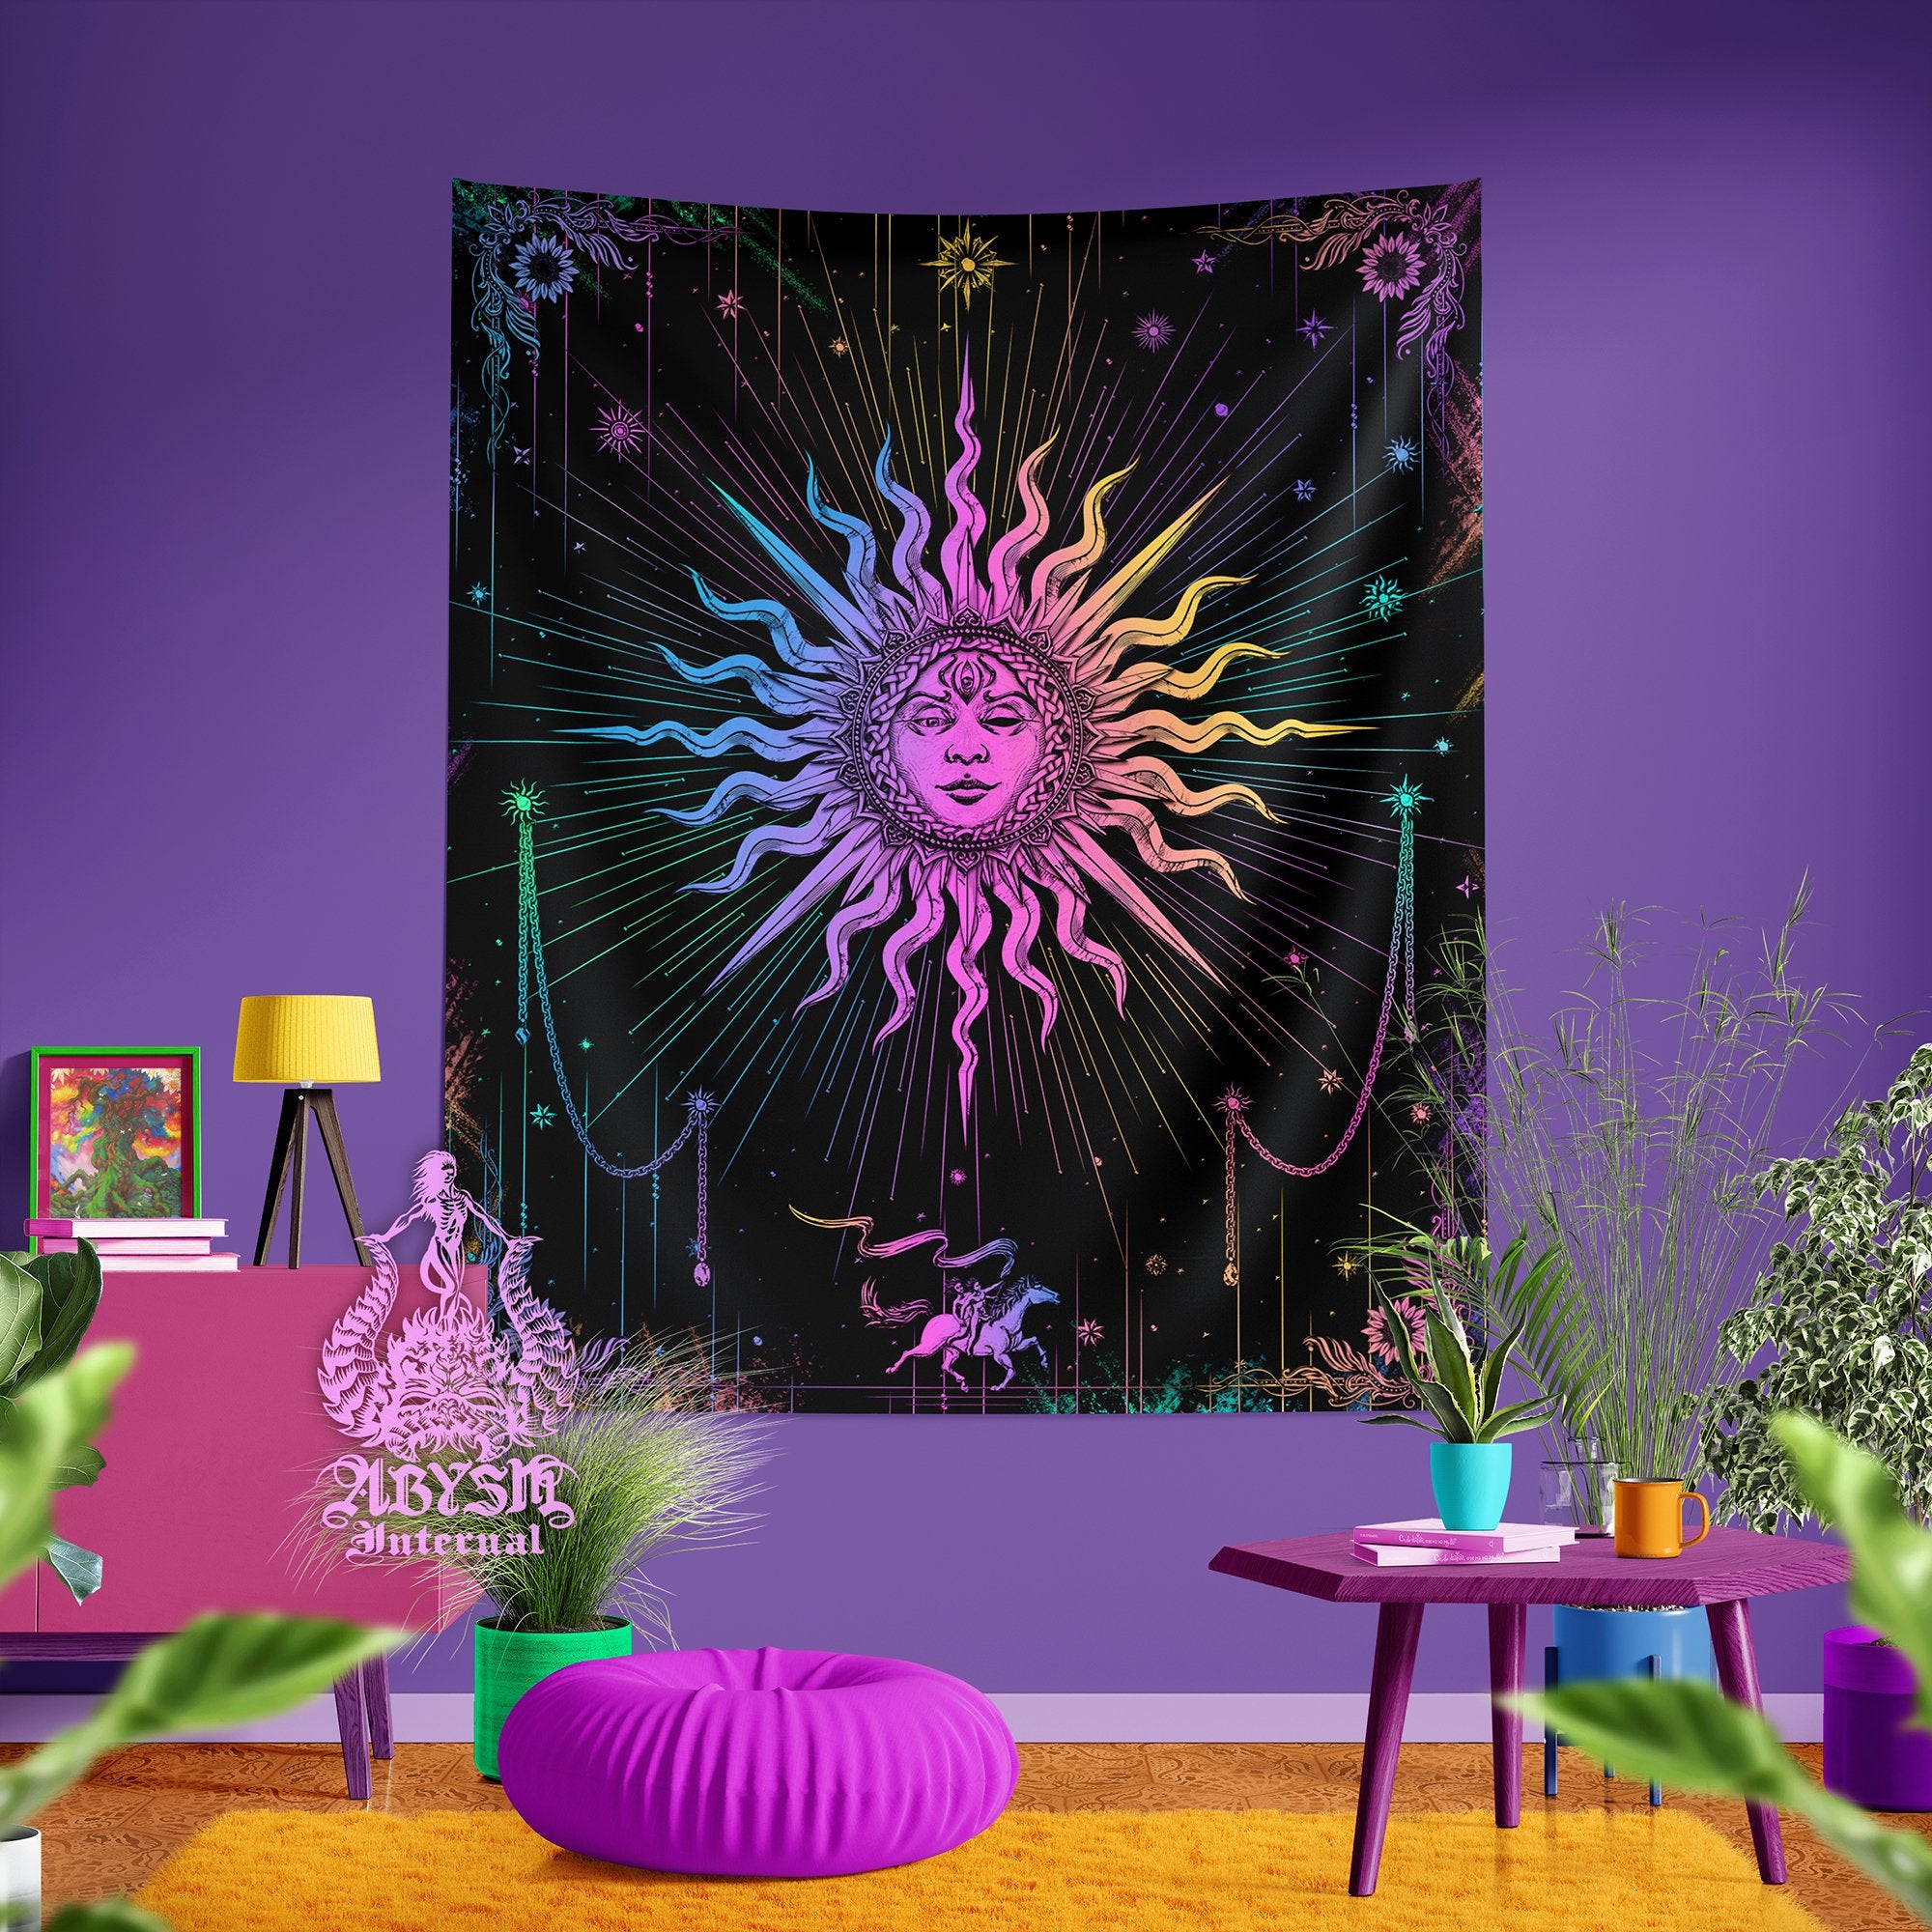 Trippy Sun Tapestry, Psychedelic Tarot Card Arcana Wall Hanging, Magic and Esoteric Art, Indie and Boho Home Decor, Vertical Print - Pastel Dark - Abysm Internal